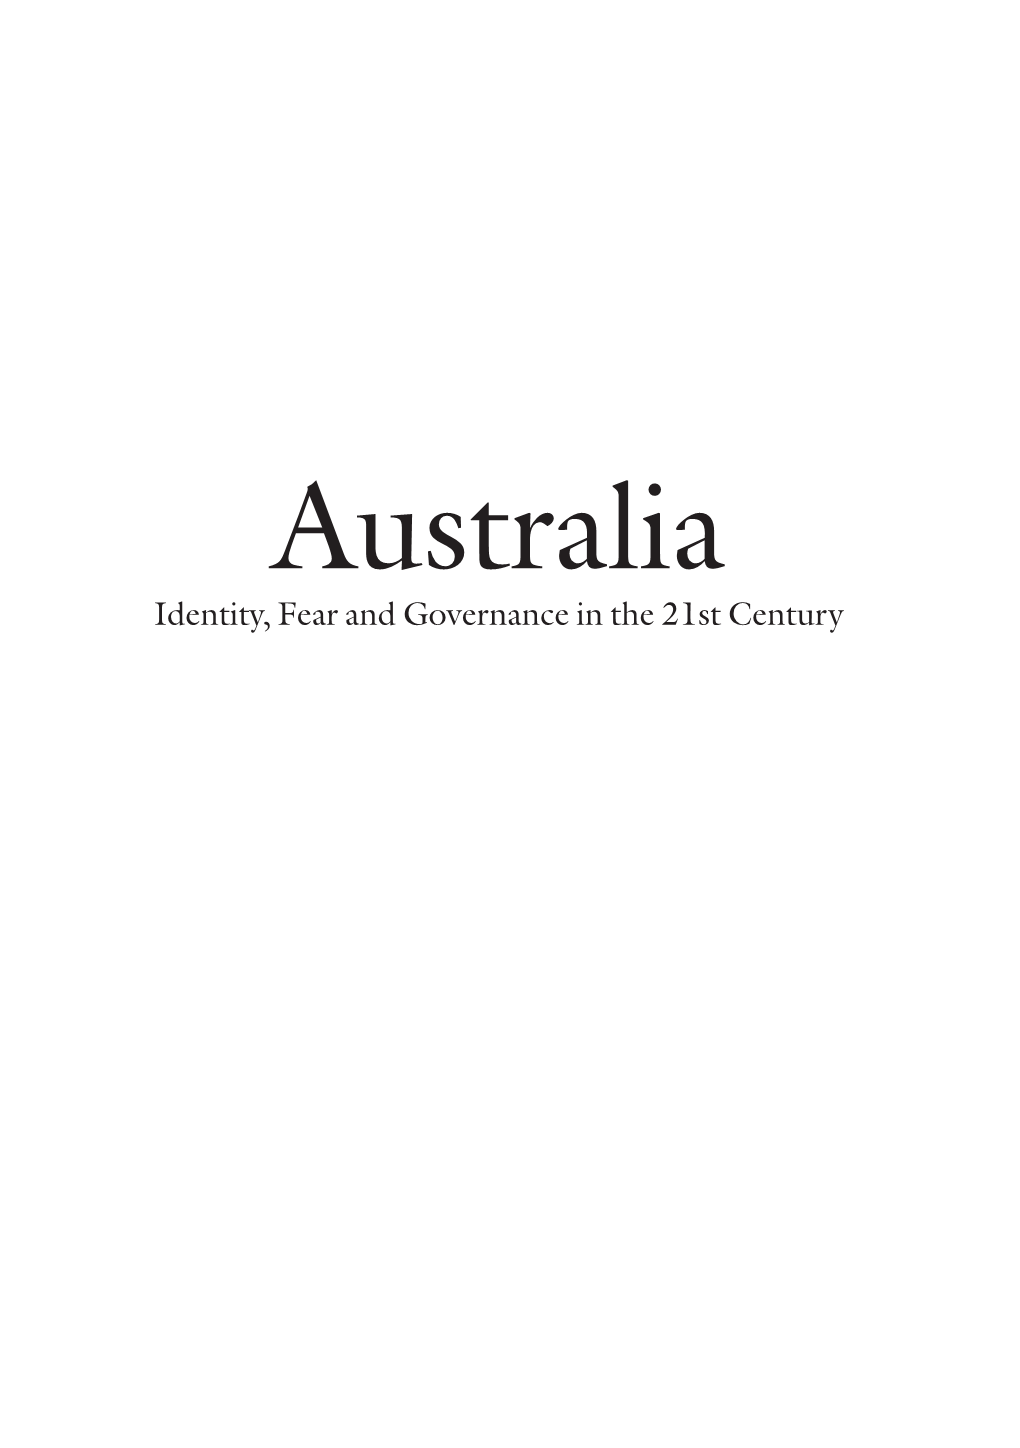 Australia: Identity, Fear and Governance in the 21St Century